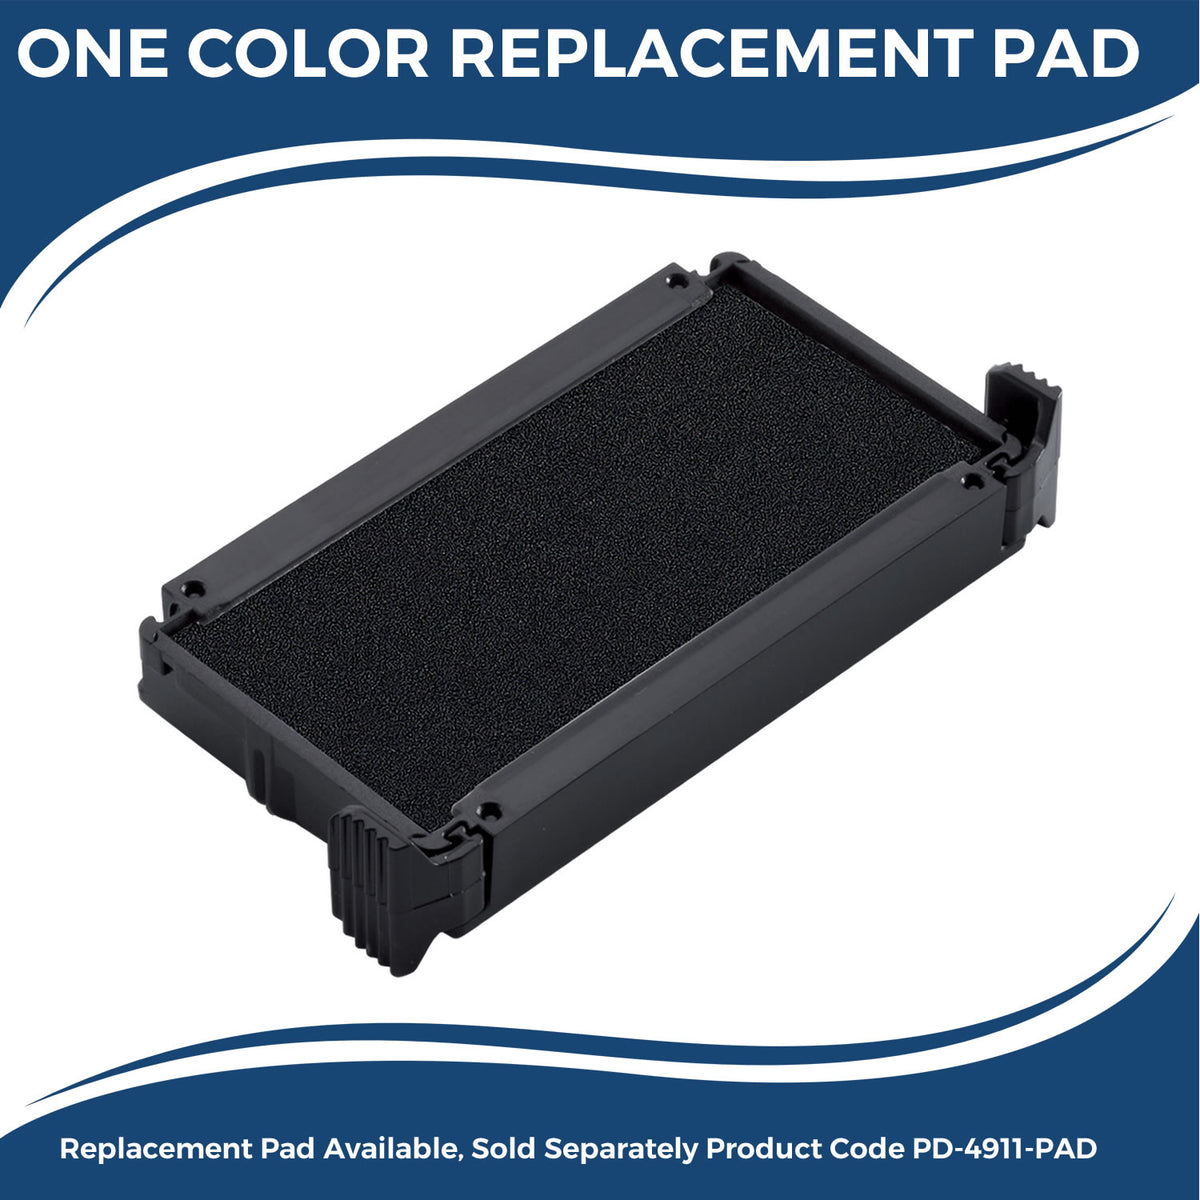 Self-Inking Shelter in Place Stamp 4480S Small Replacment Pad